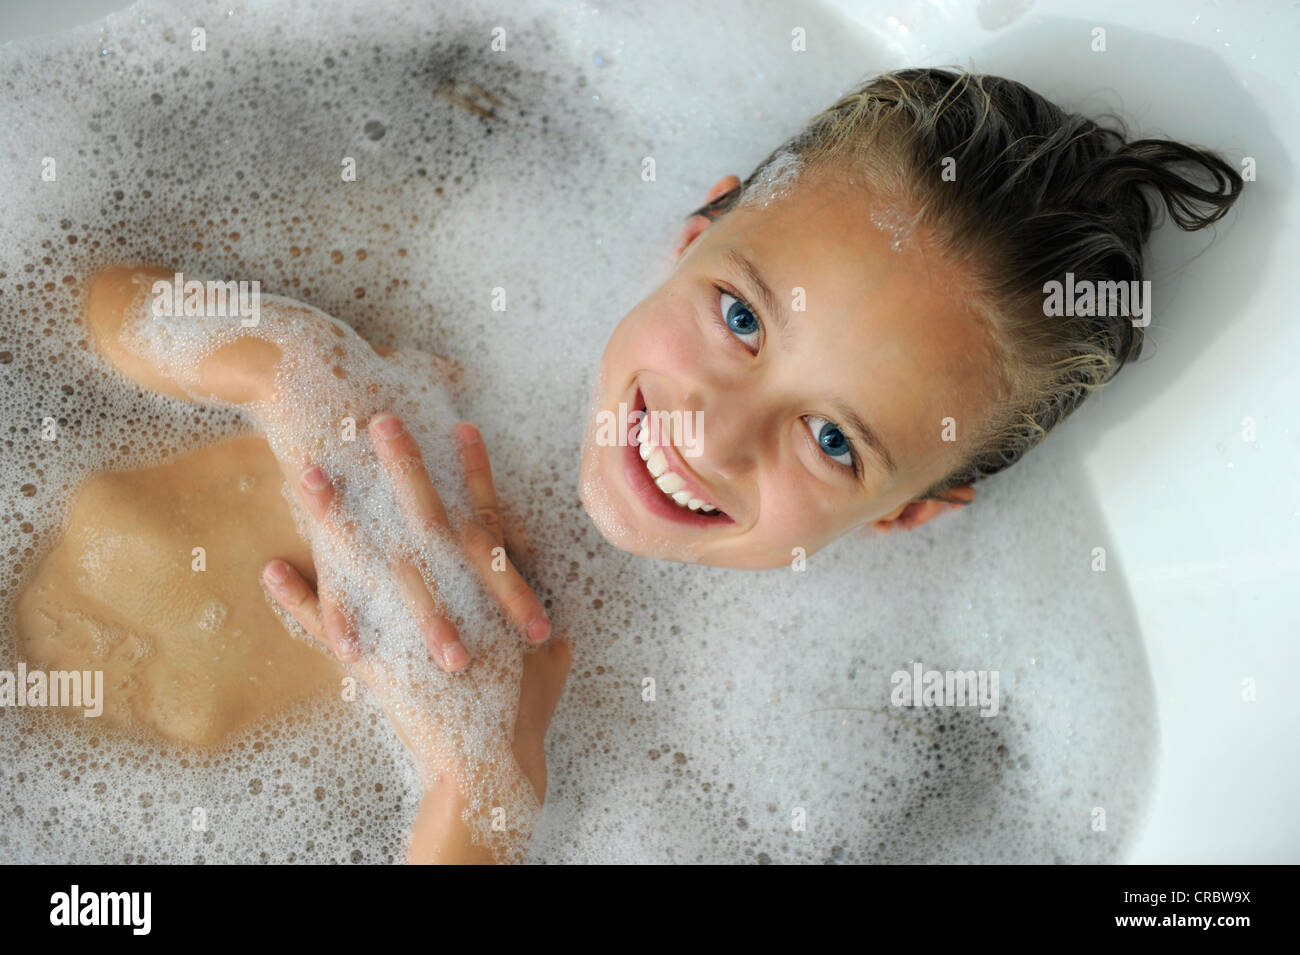 Young Girl In A Bathtub Stock Photo 48819174 Alamy